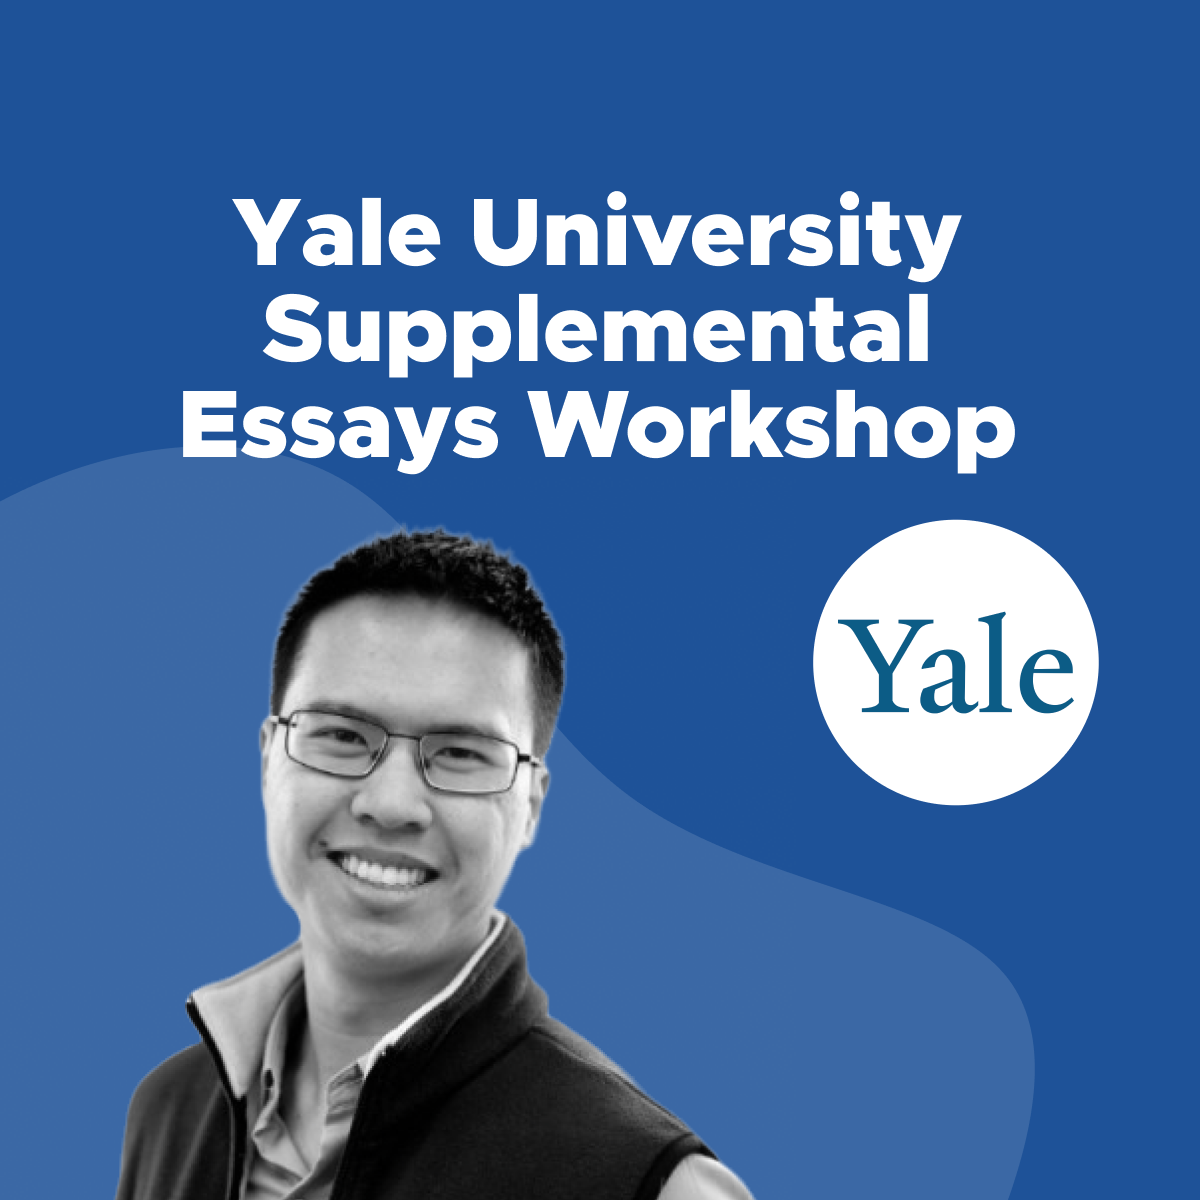 does yale have supplemental essays